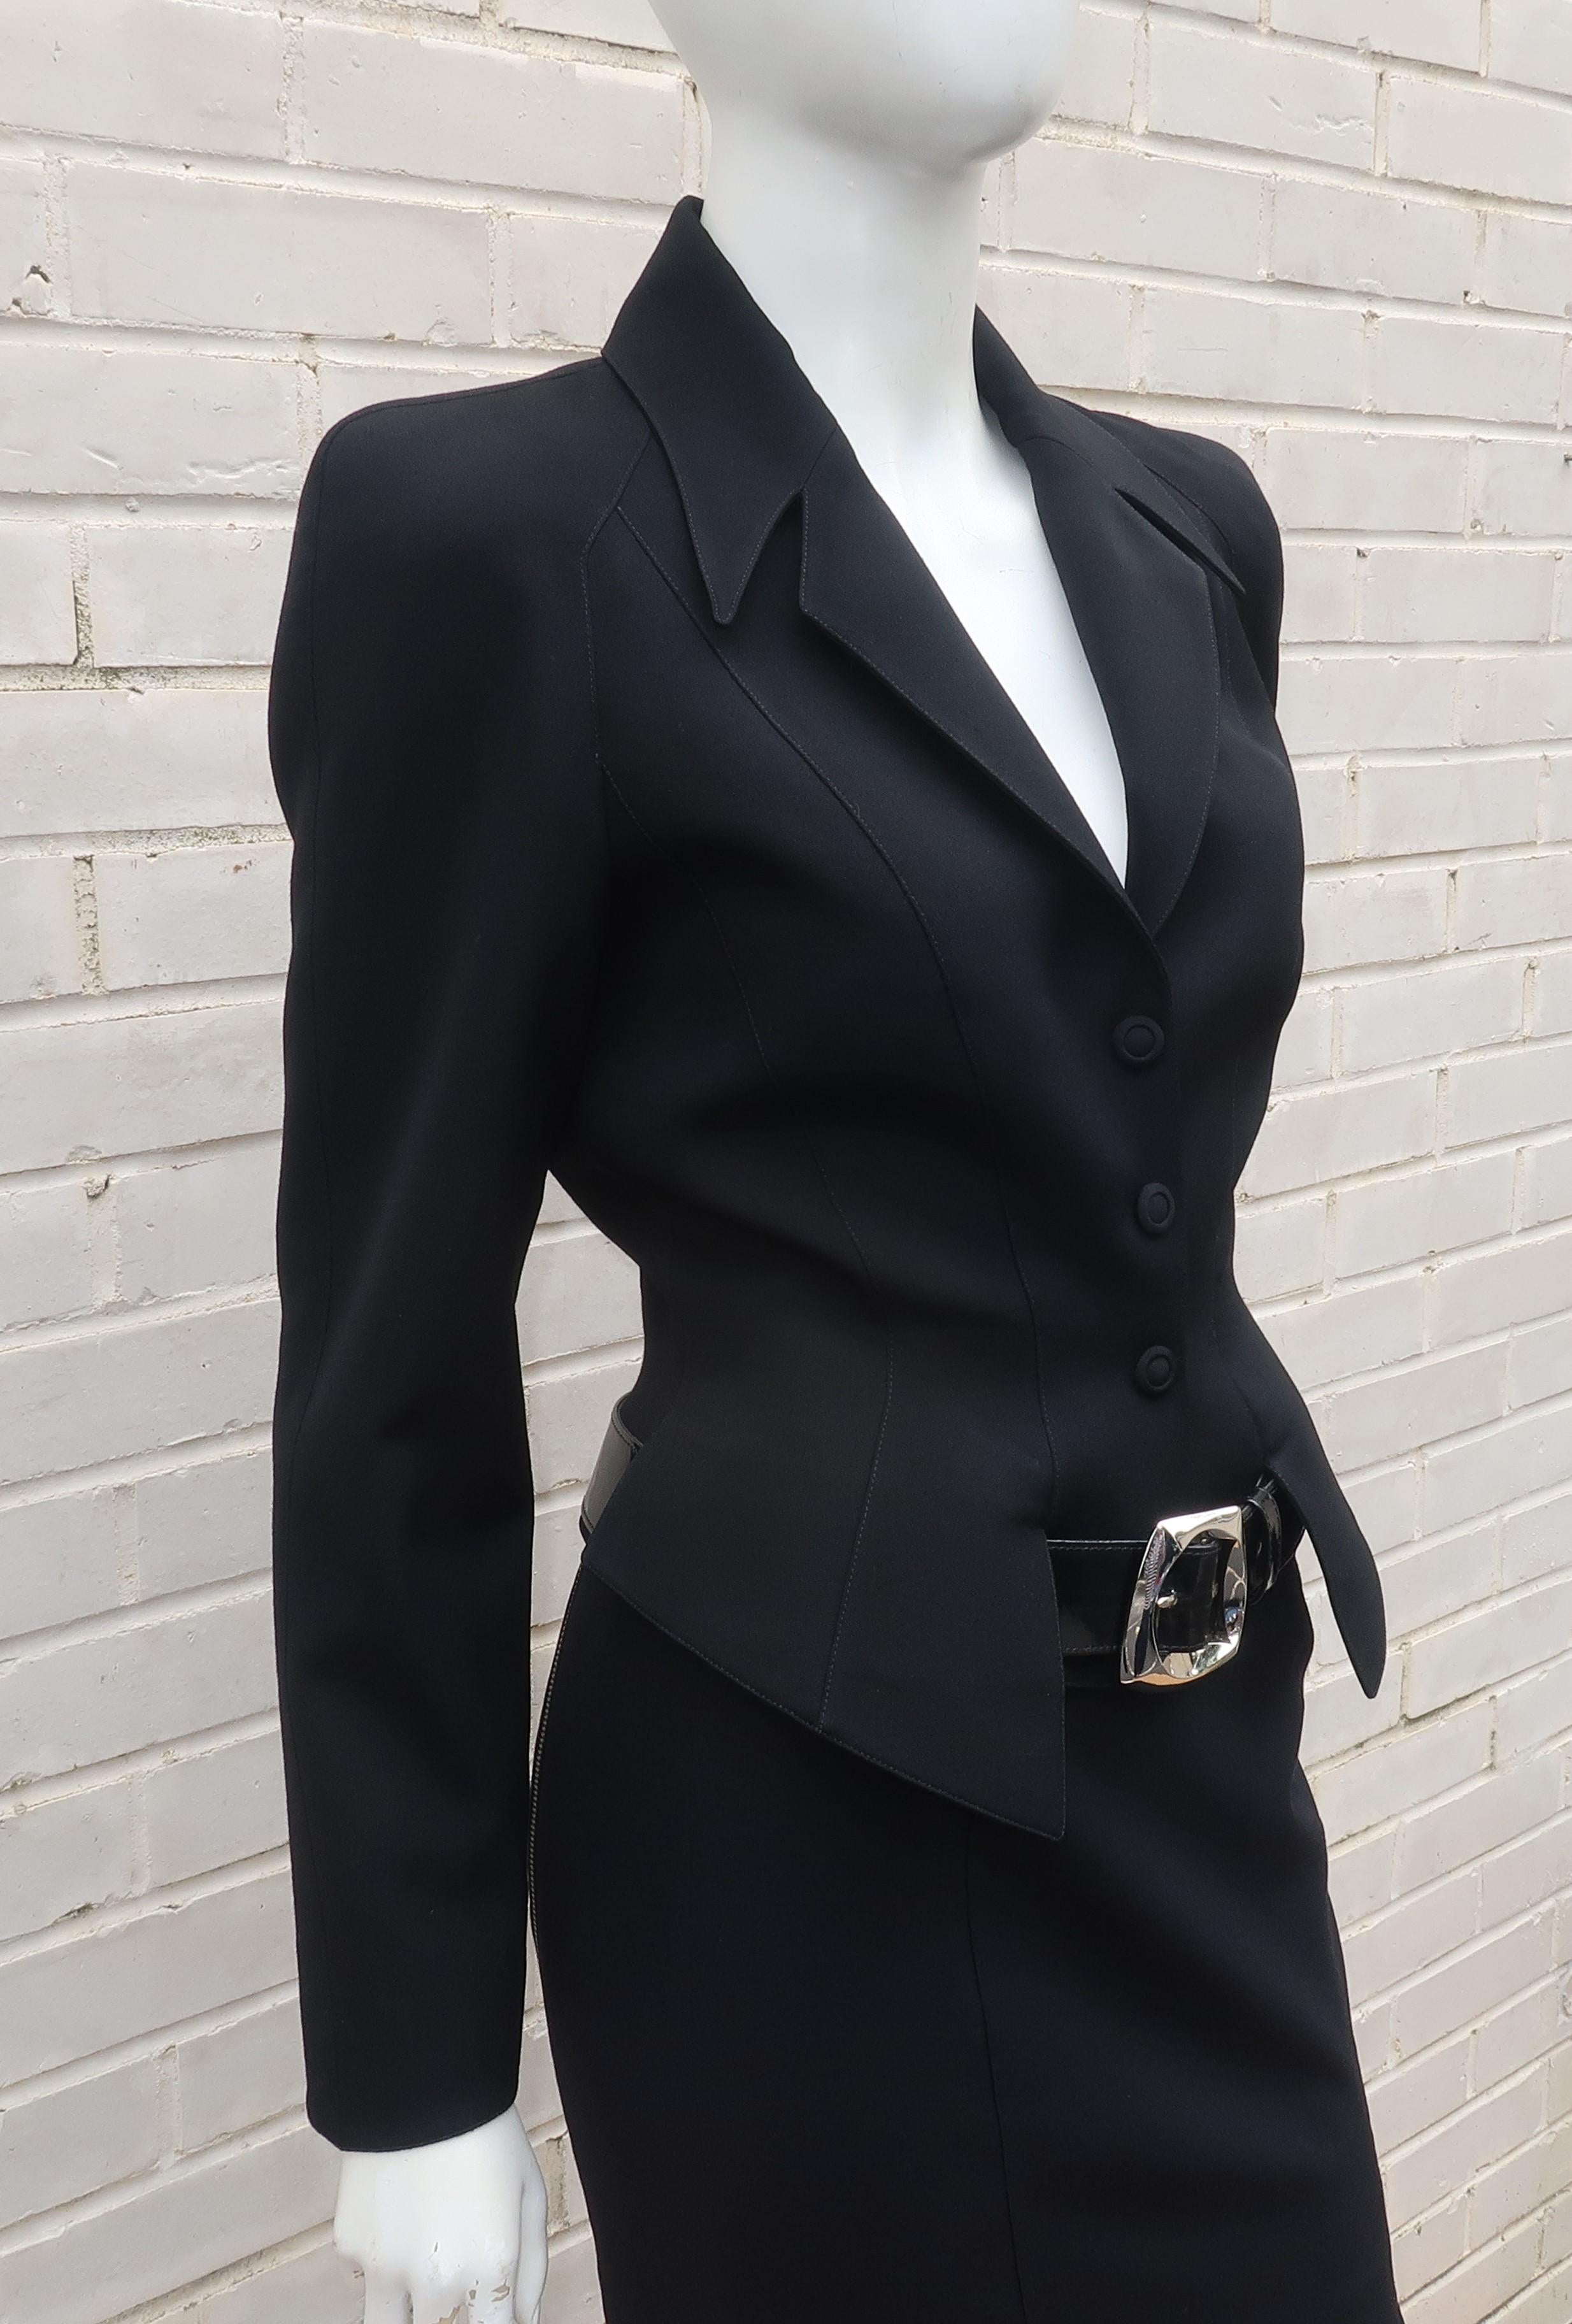 Thierry Mugler Black Suit With Belt, 1990's 1